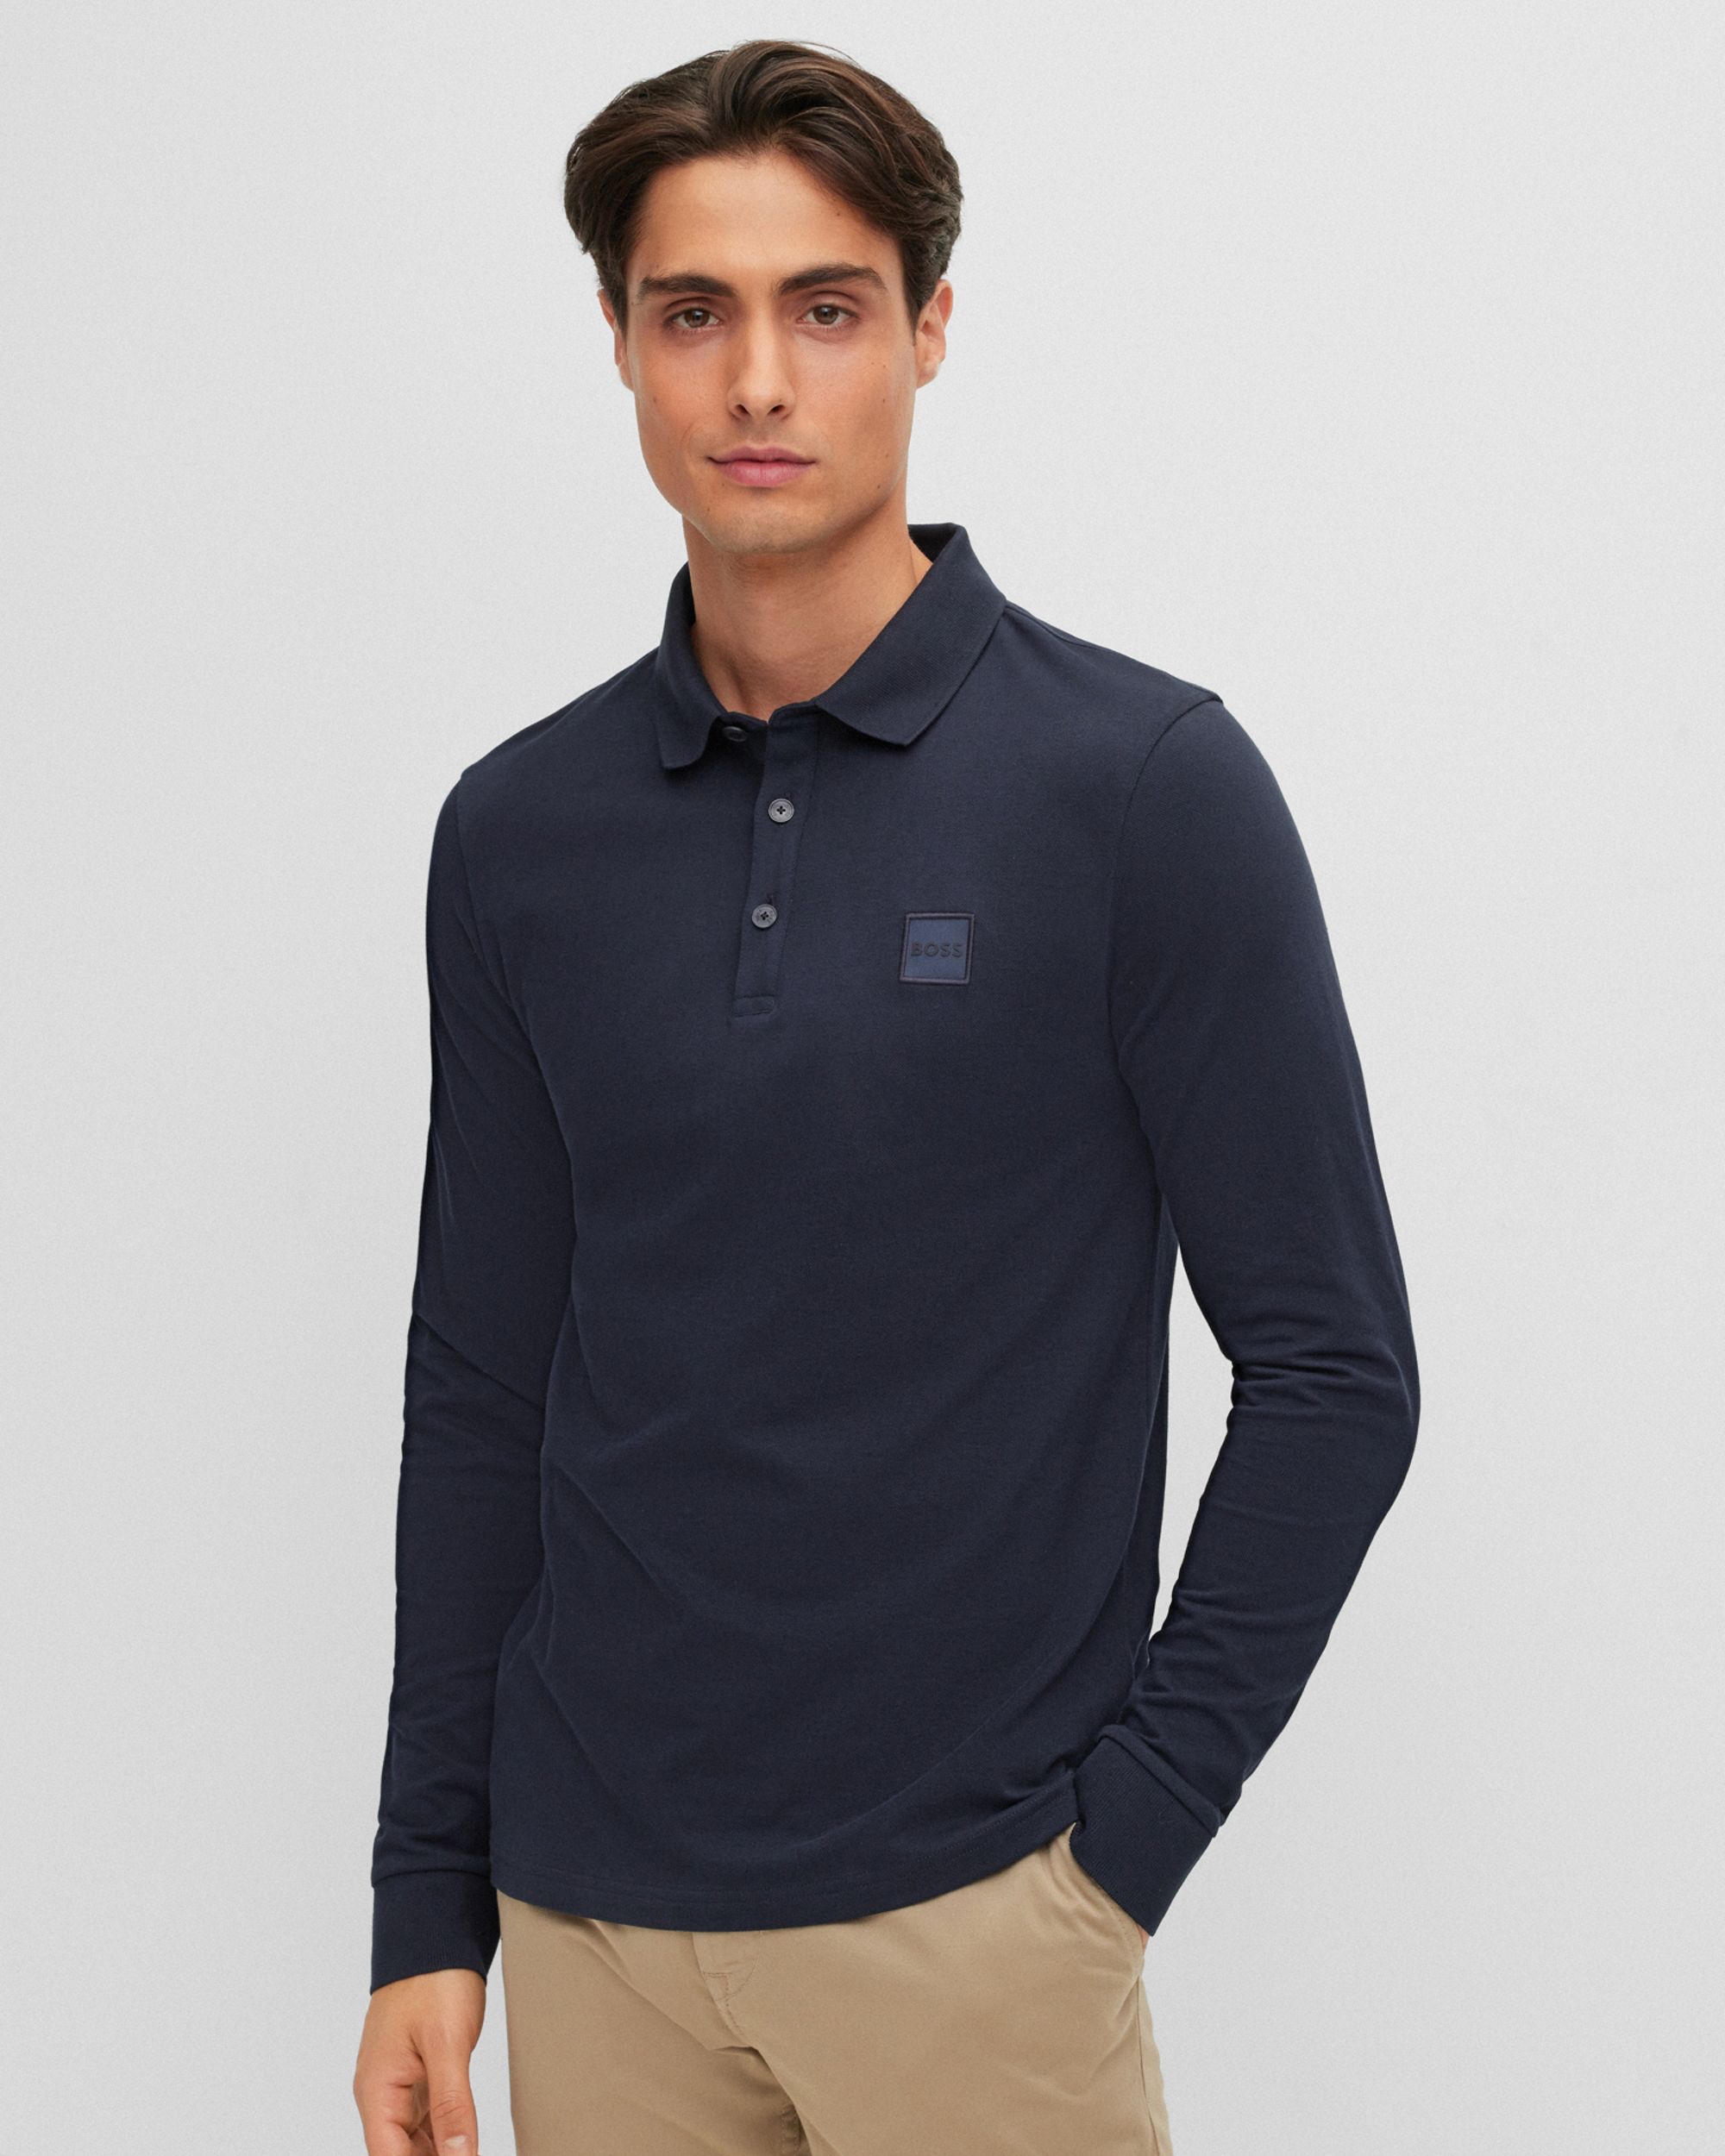 Hugo Boss Casual Passerby Polo LM Donker blauw 074035-001-L